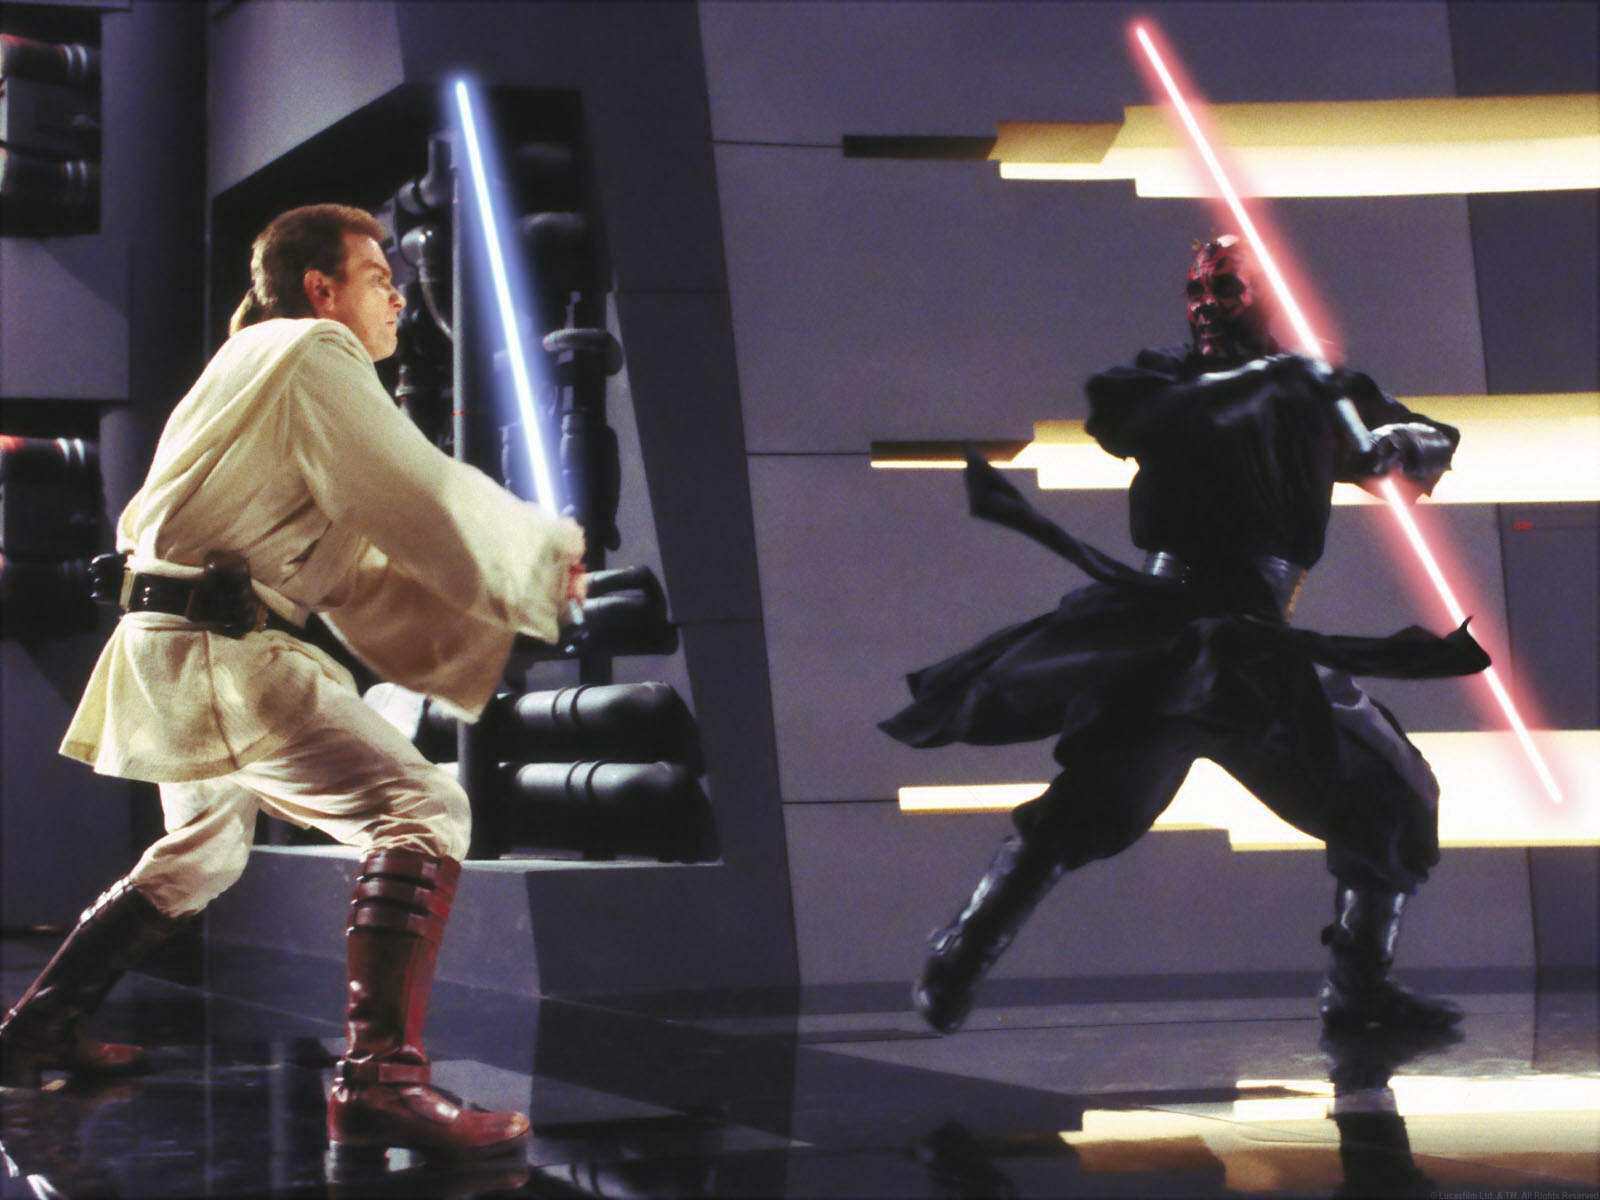 How The Obi Wan Series Could Give Us A Darth Maul Rematch